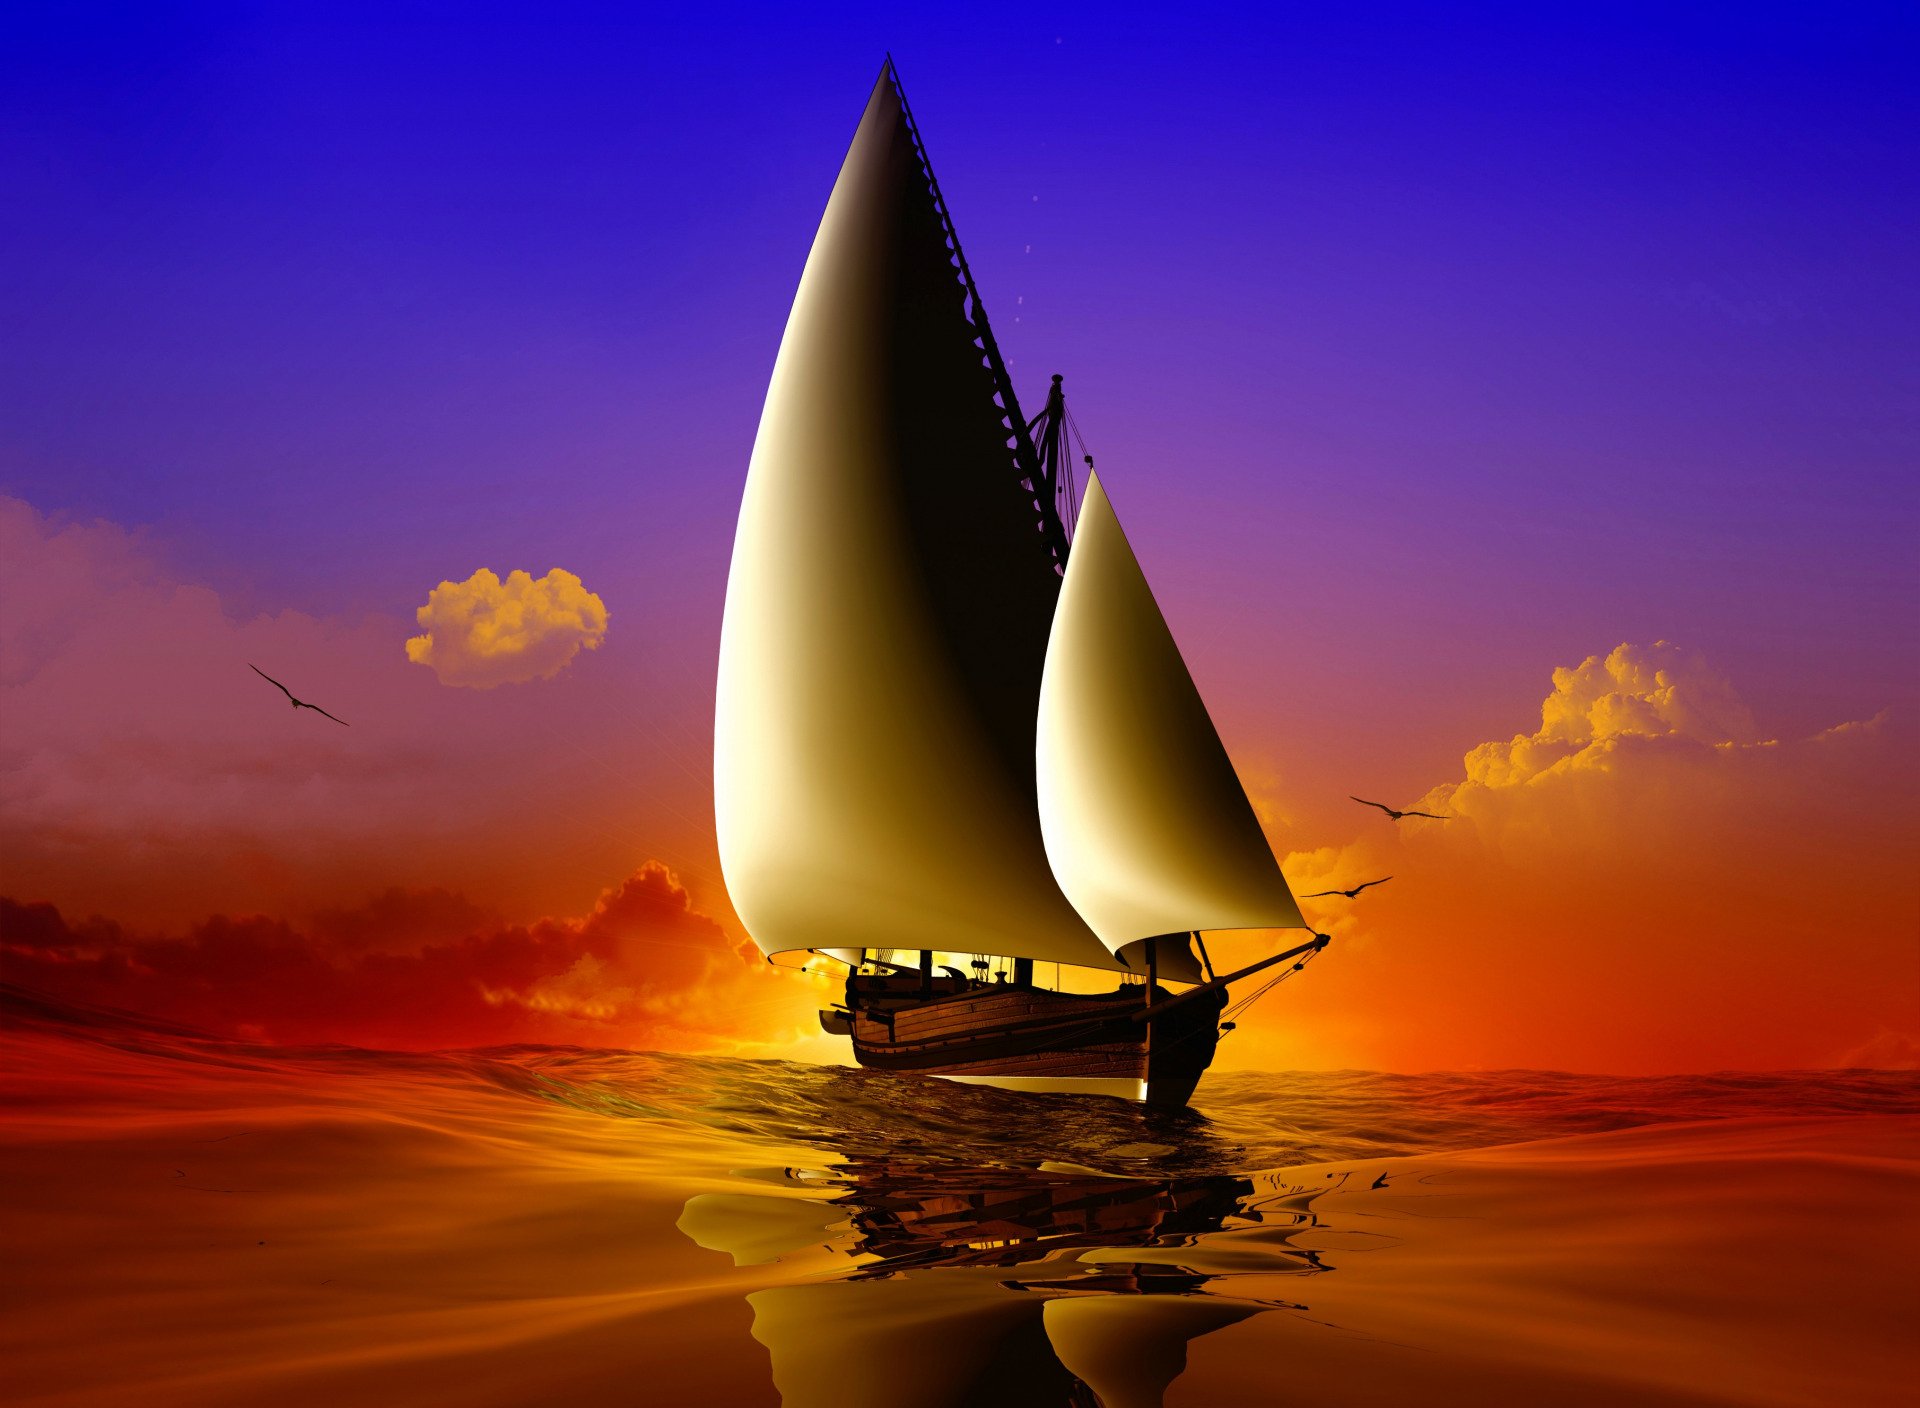 Sailboat in the Sunset HD Wallpaper | Background Image | 1920x1408 | ID